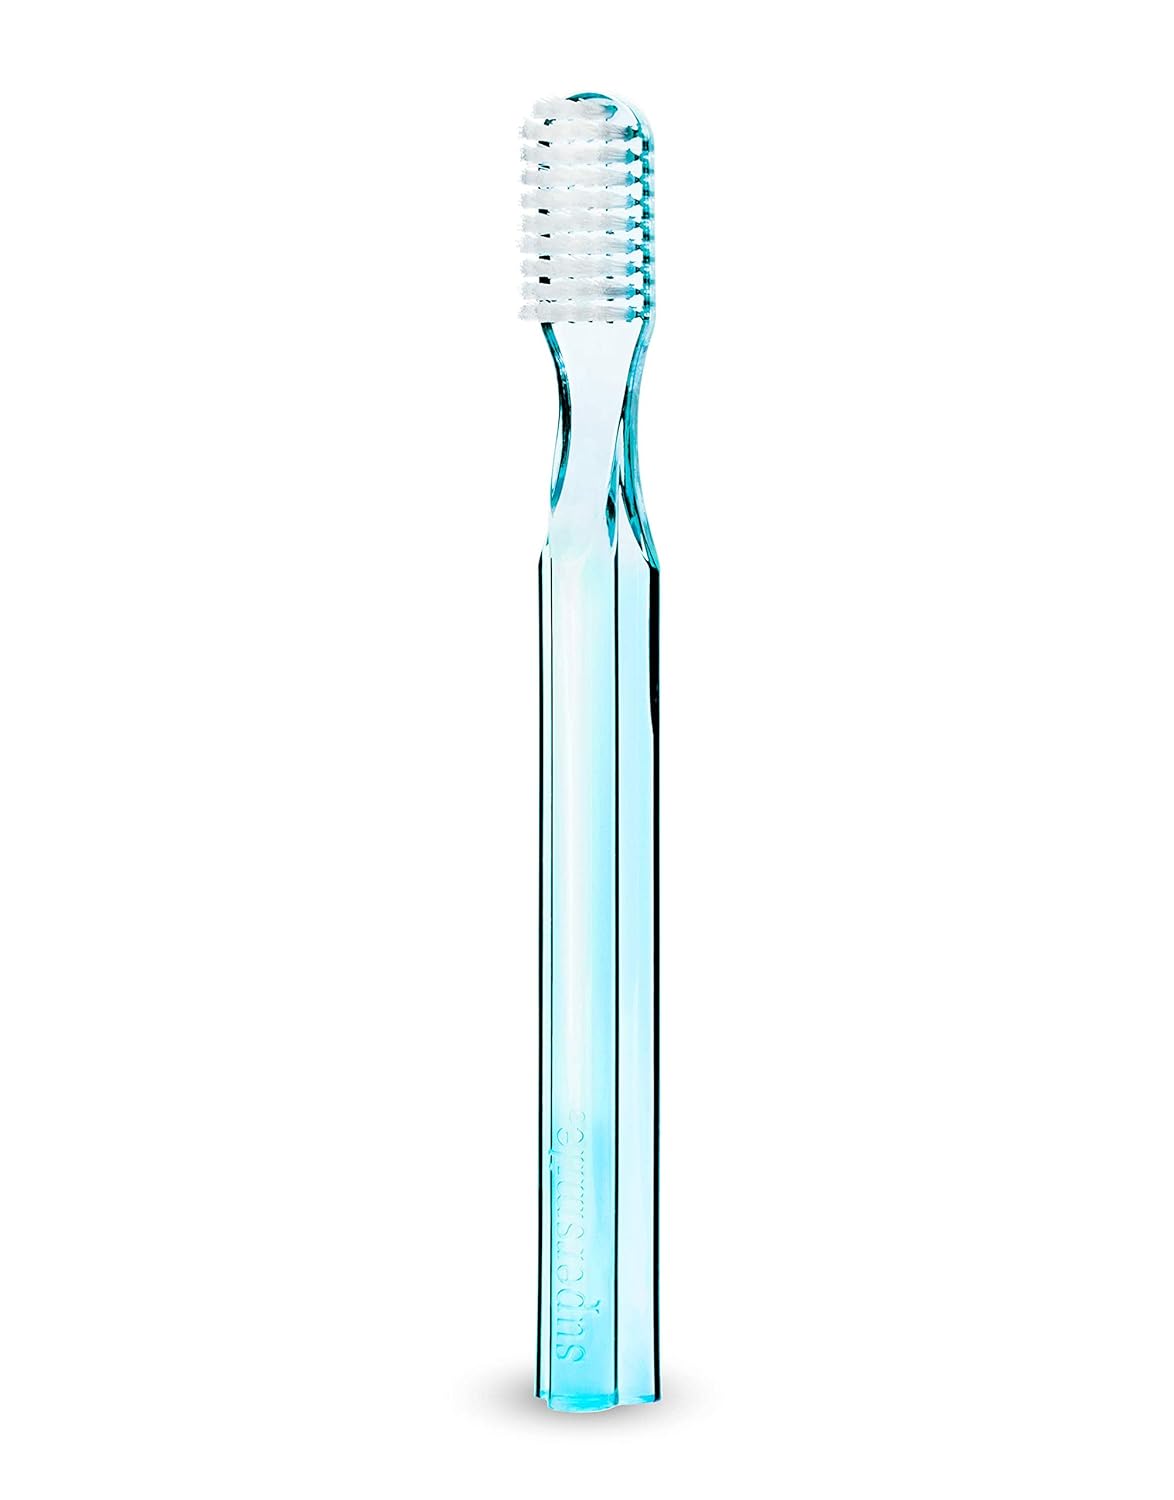 New Generation Collection Toothbrush